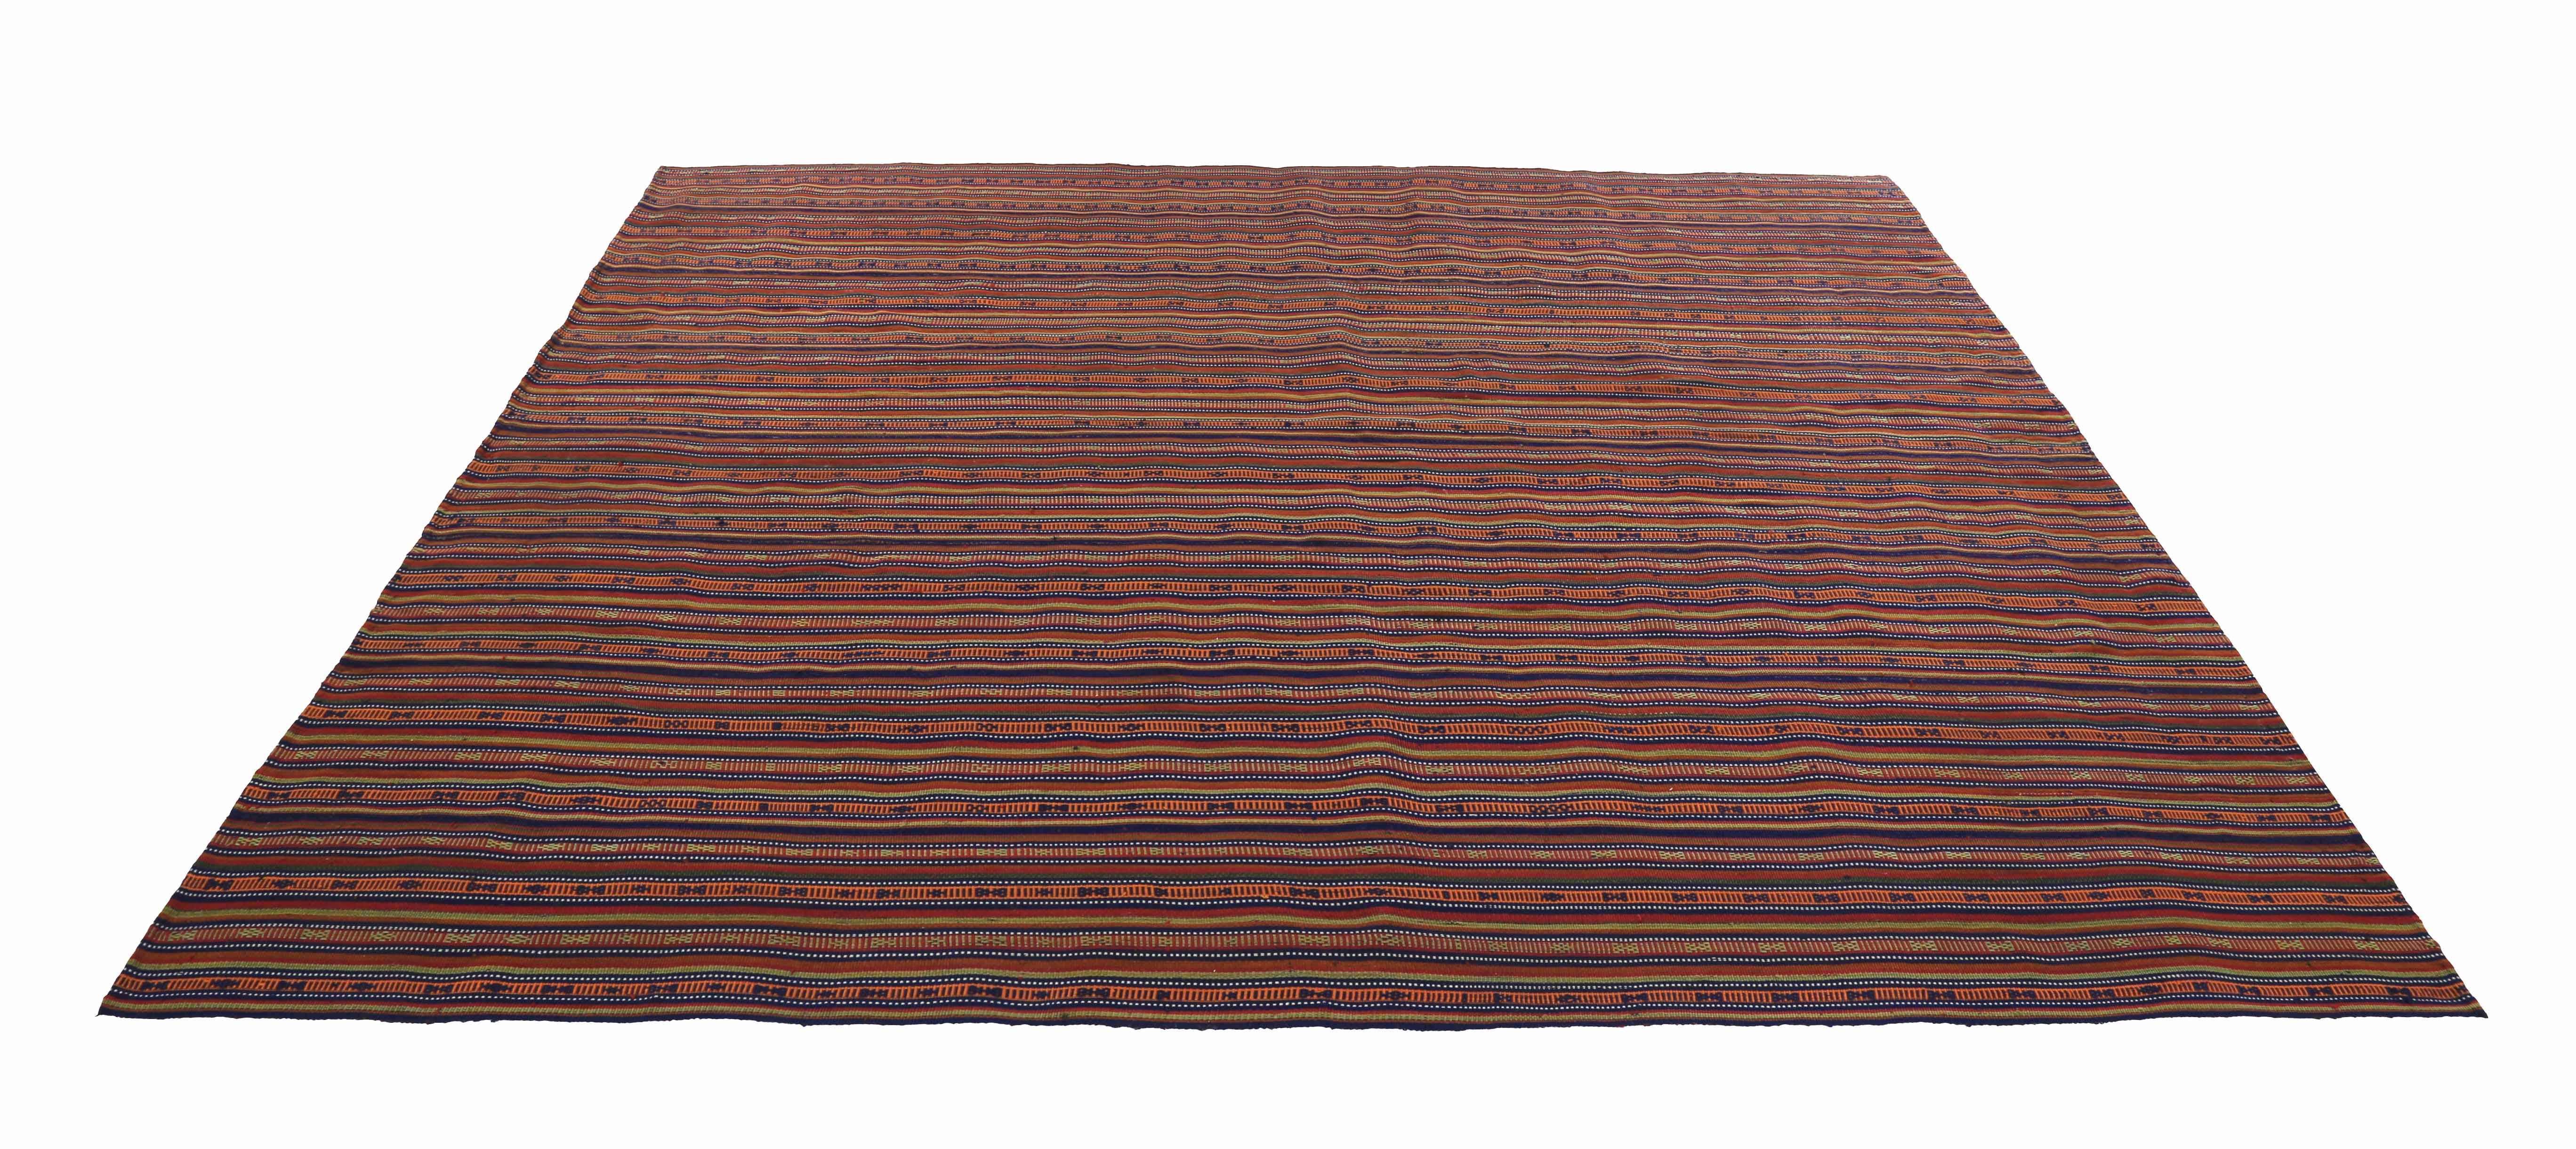 Turkish rug handwoven from the finest sheep’s wool and colored with all-natural vegetable dyes that are safe for humans and pets. It’s a traditional Kilim flat-weave design featuring navy, green and brown tribal stripes and patterns. It’s a stunning